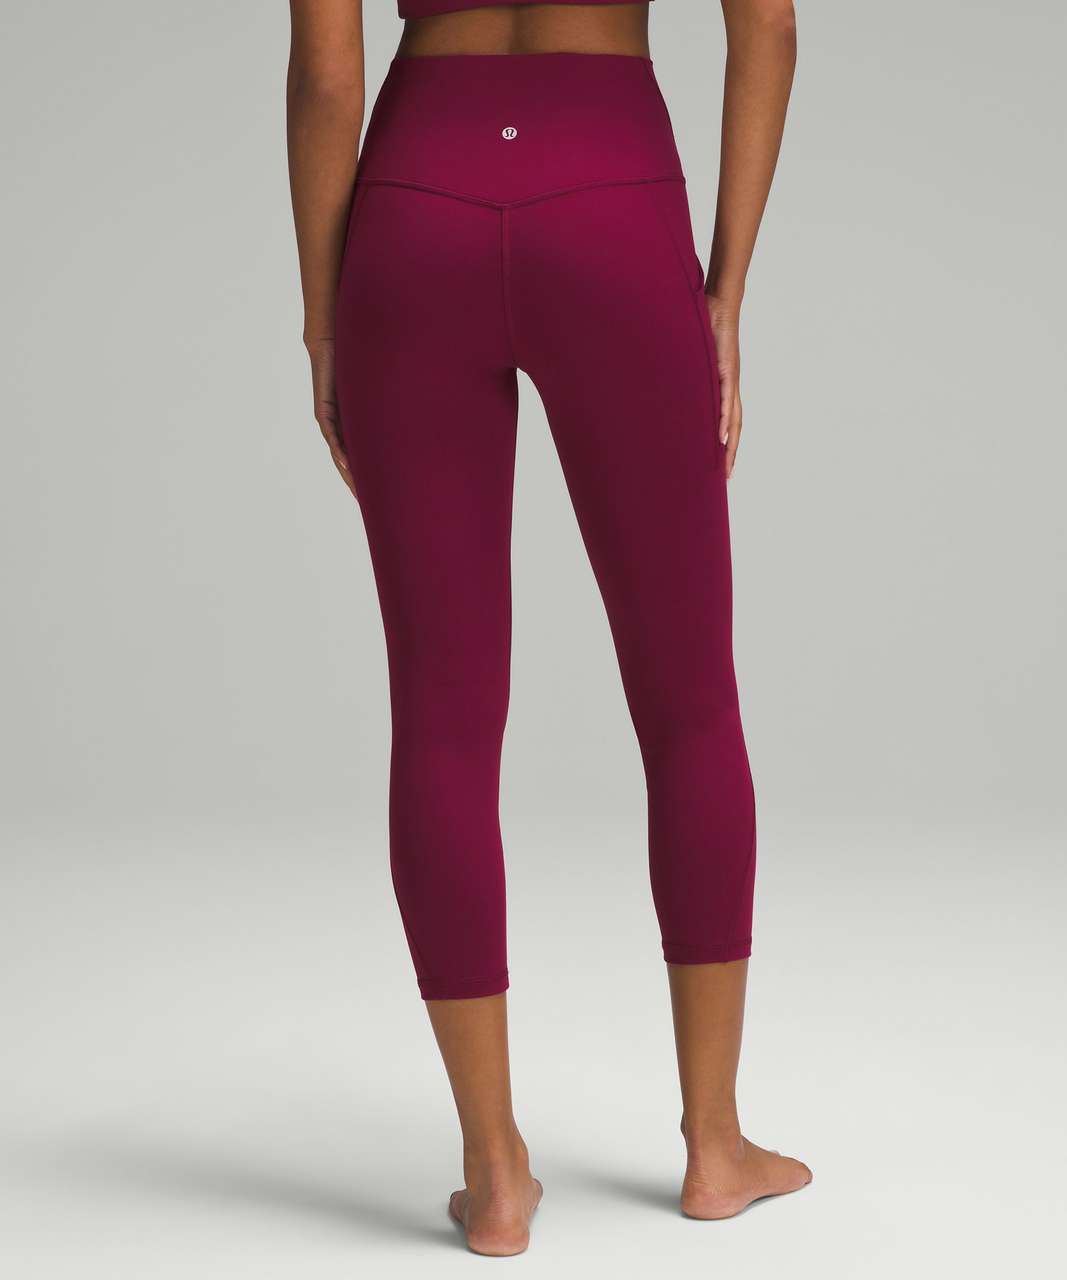 Lululemon Align High-Rise Crop with Pockets 23" - Deep Luxe